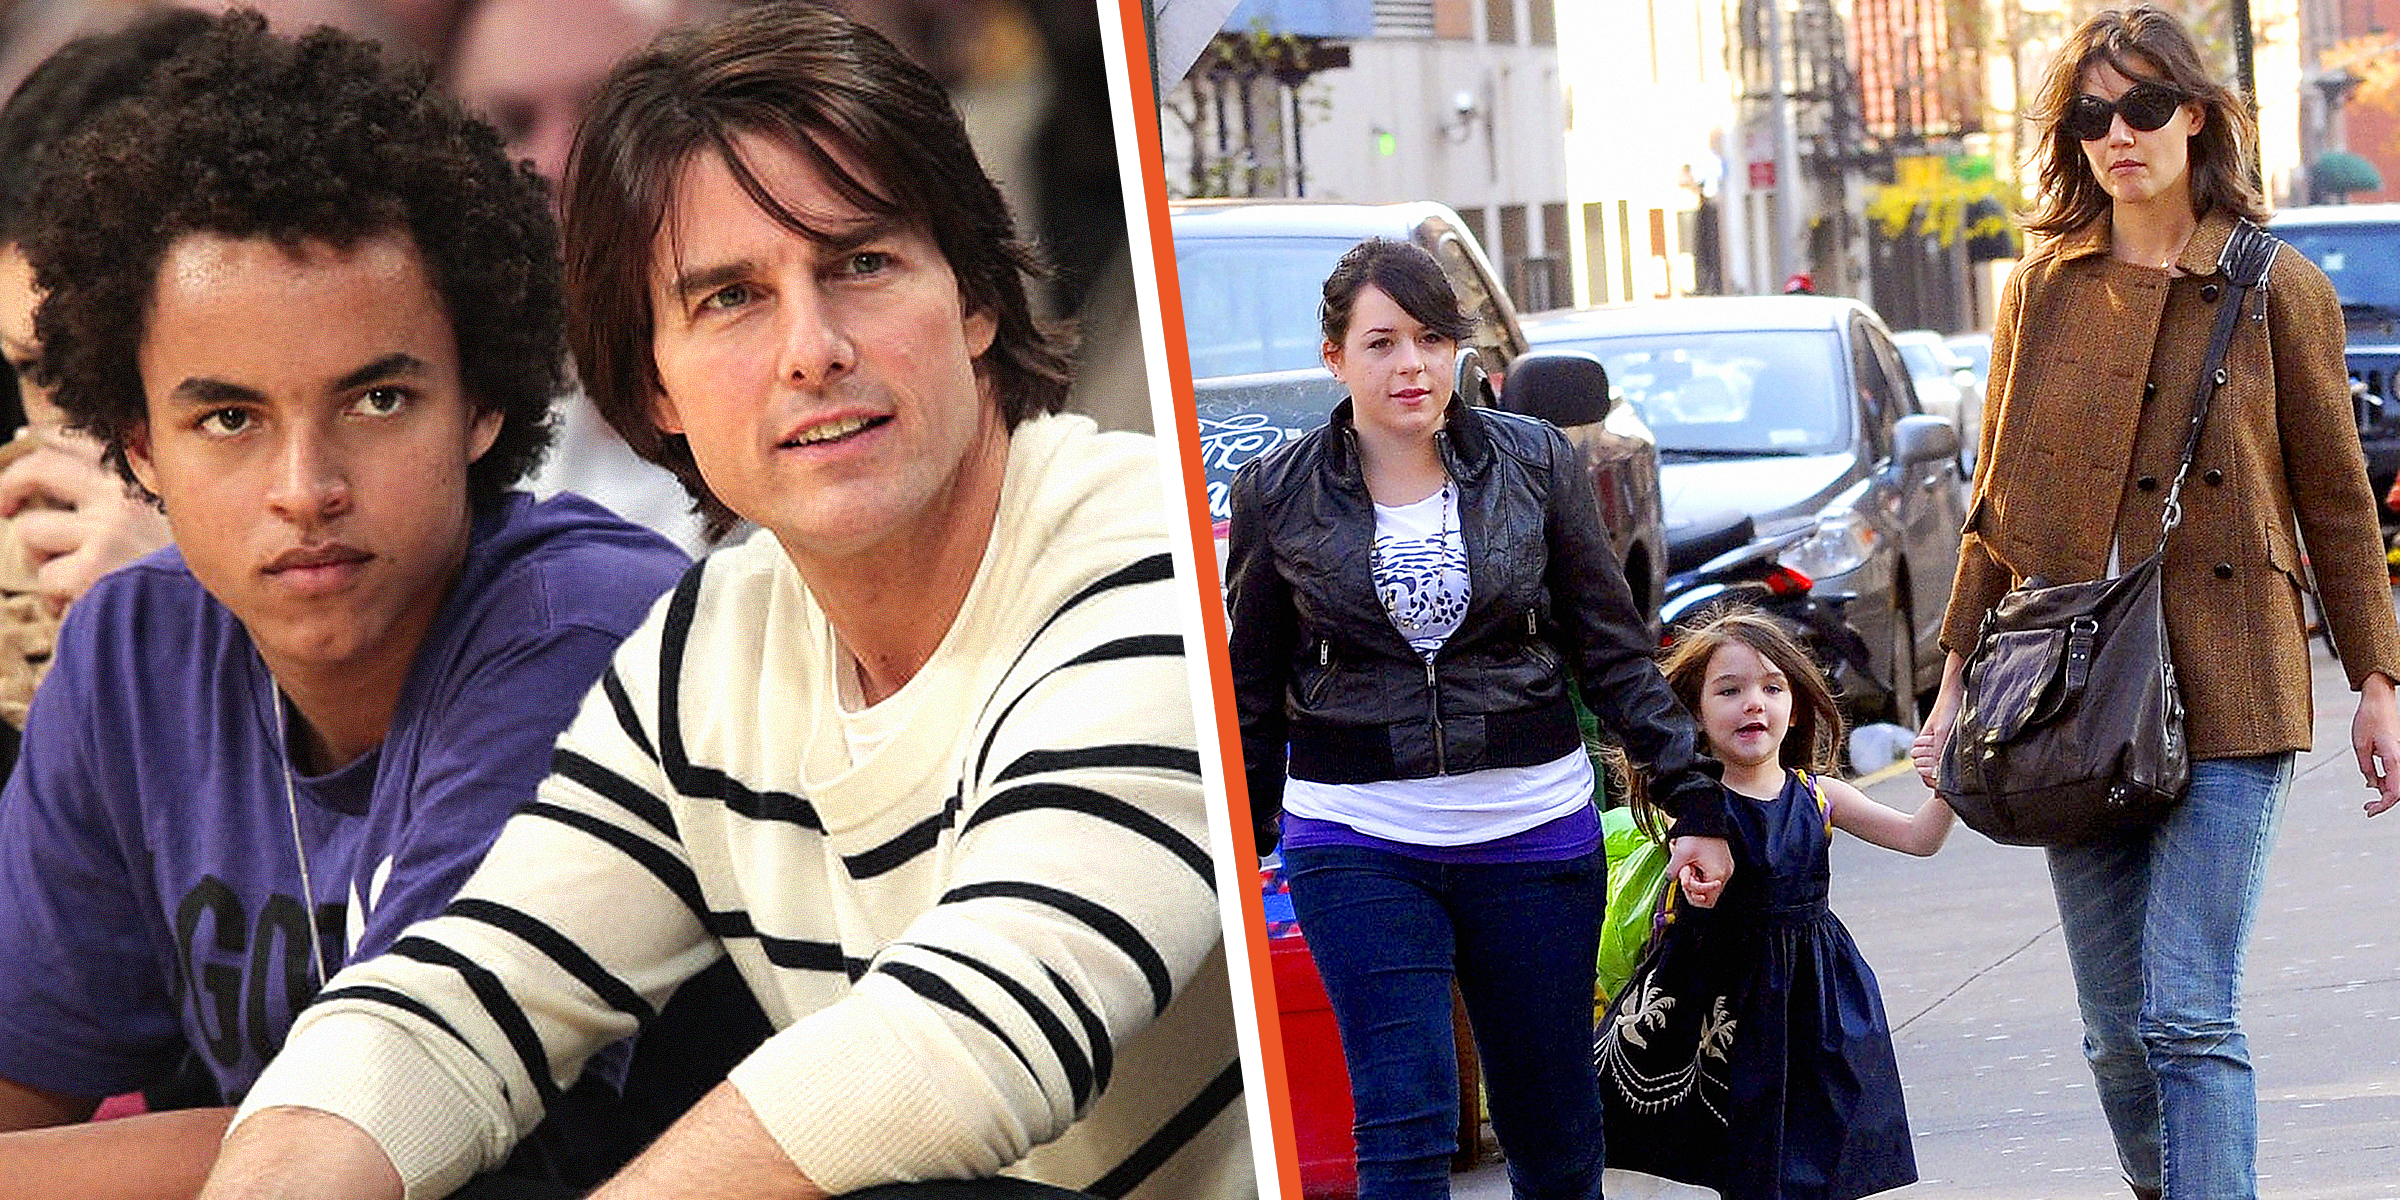 Connor Cruise and Tom Cruise (L), Bella Cruise, Suri Cruise, and Katie Holmes (R) | Source: Getty Images